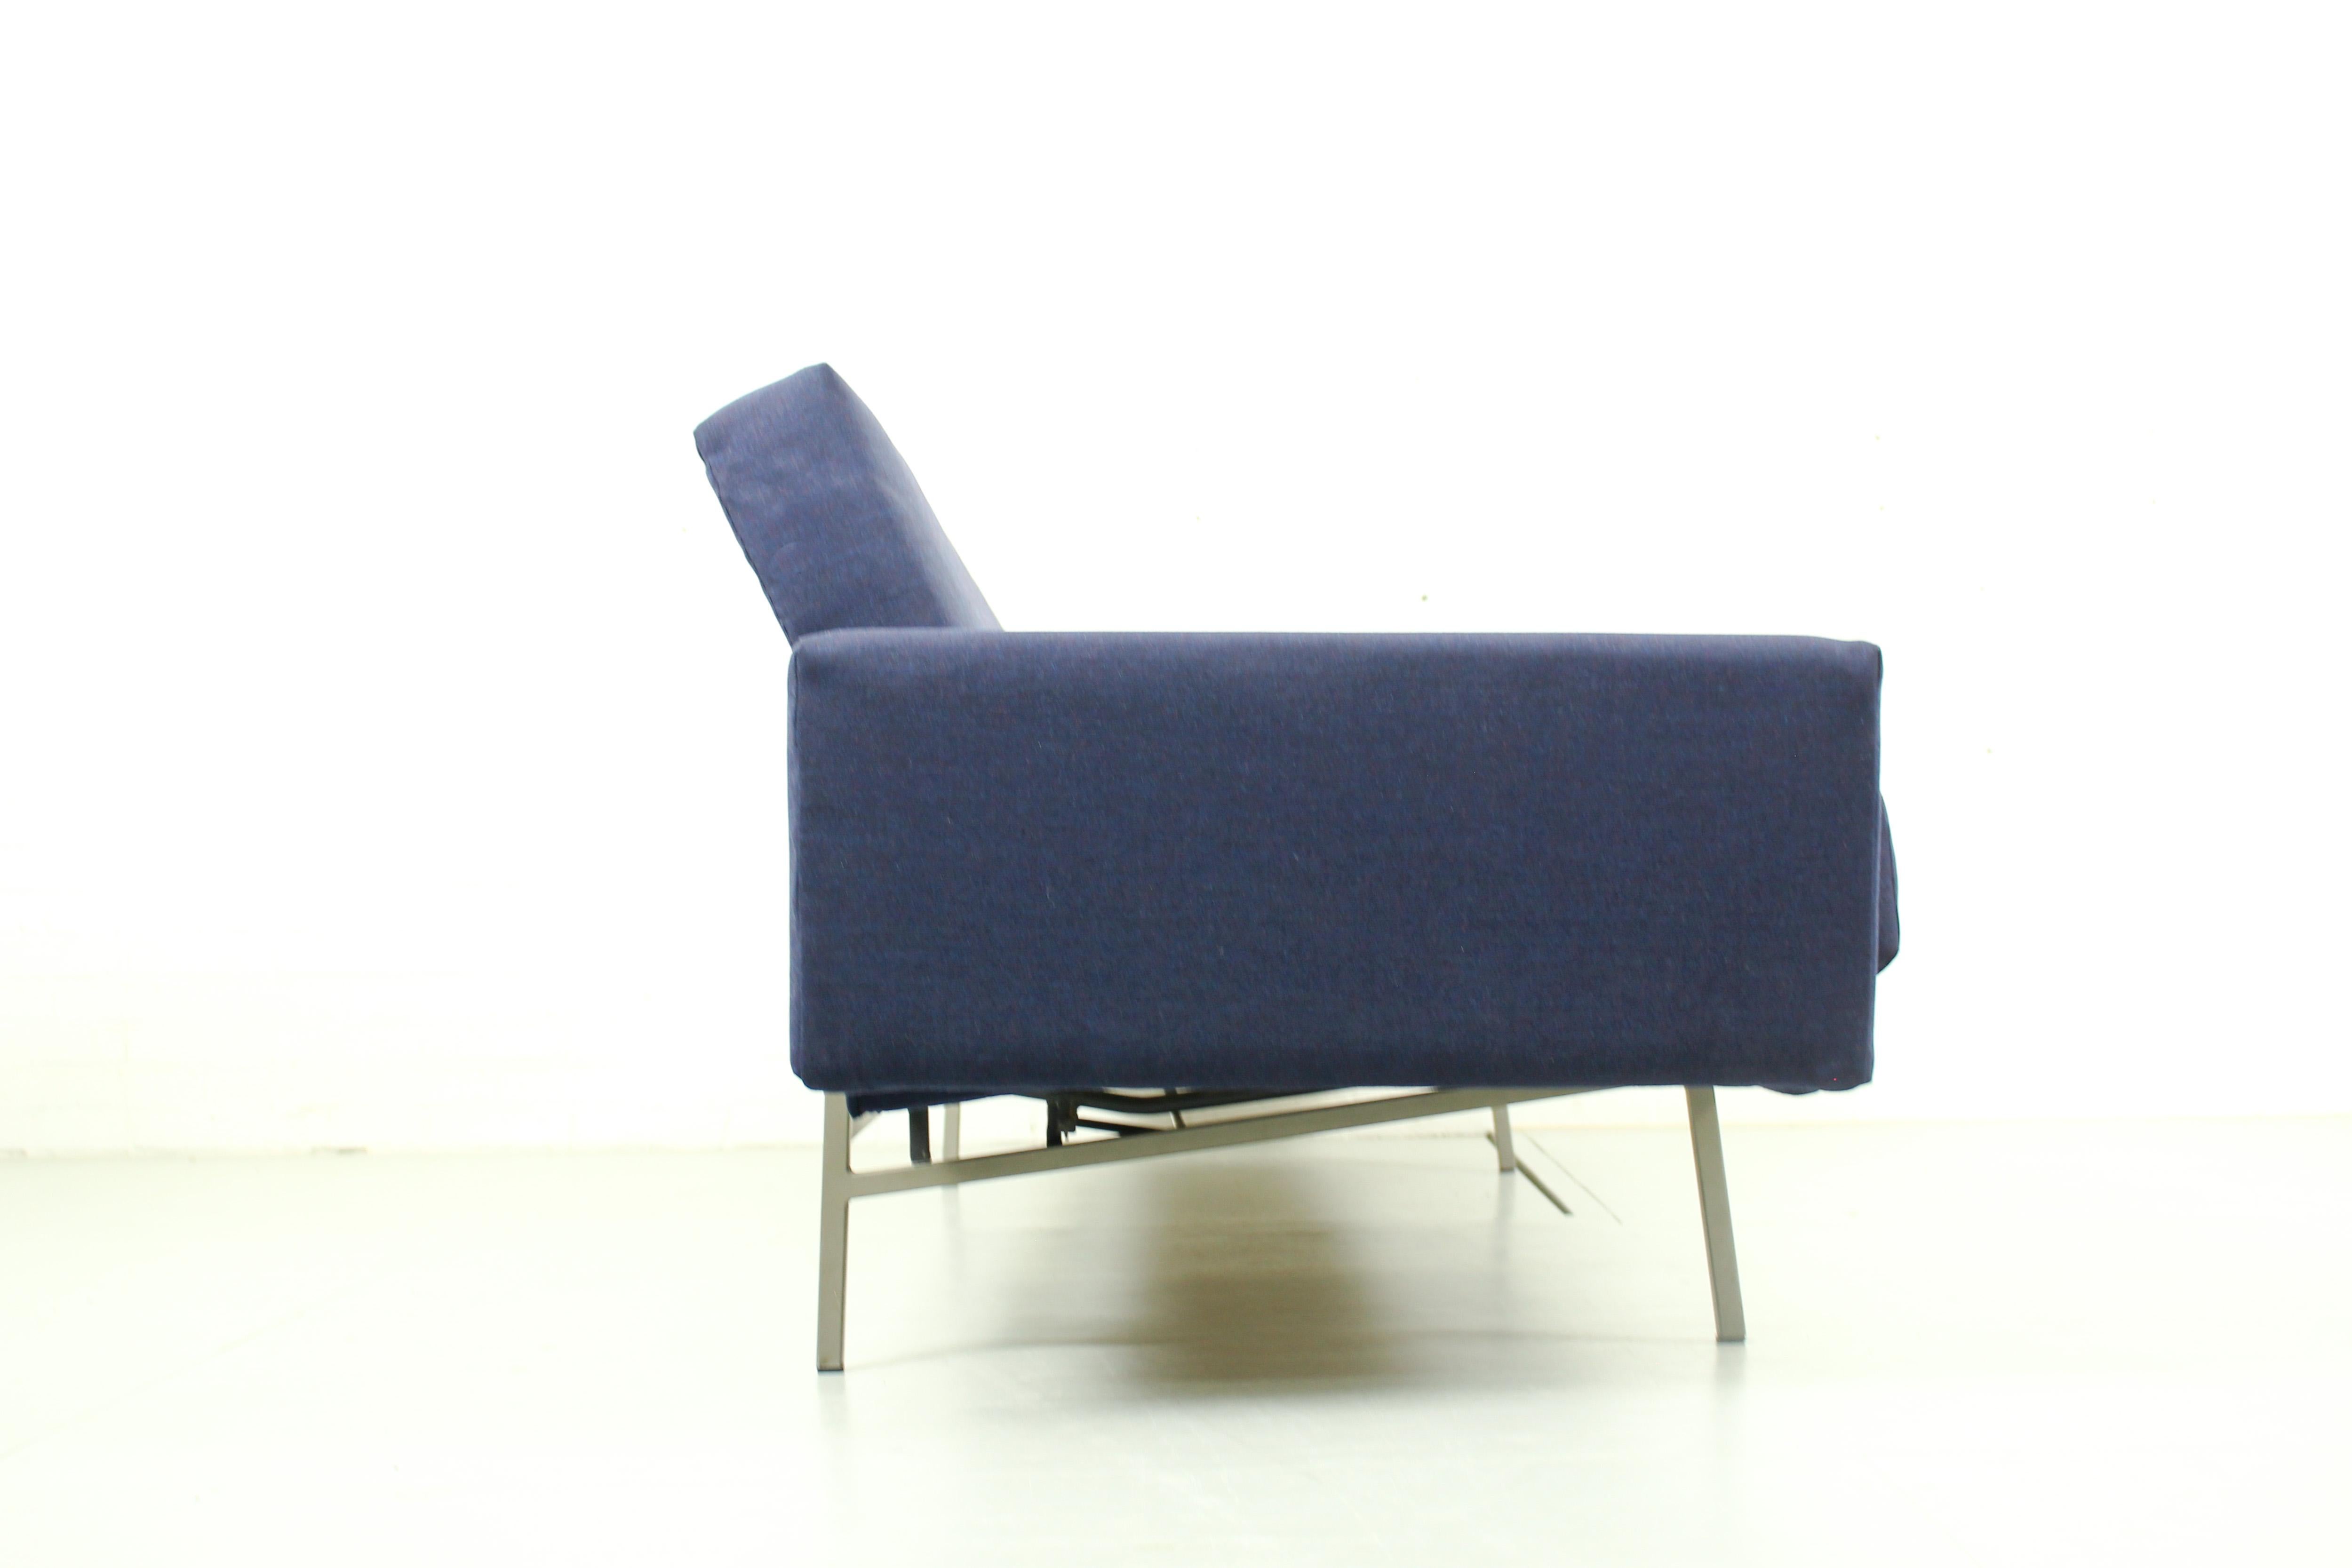 Sofa/ Daybed by Rob Parry for Gelderland, Netherlands, 1950s For Sale 3